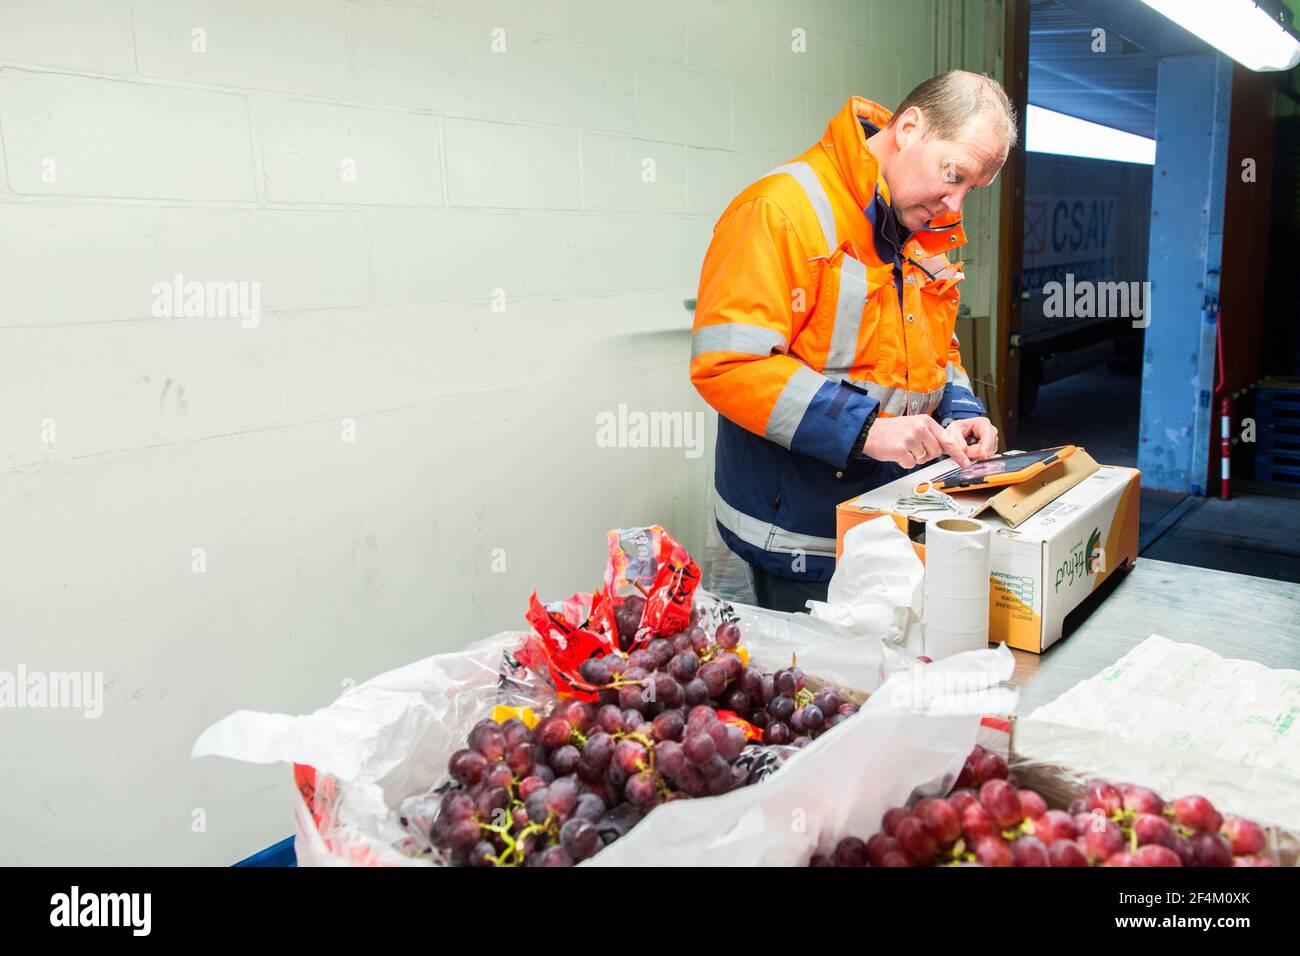 Rotterdam, Netherlands. One man checking a just arrived shipload of grapes, inside a cooled harbor warehouse. Stock Photo